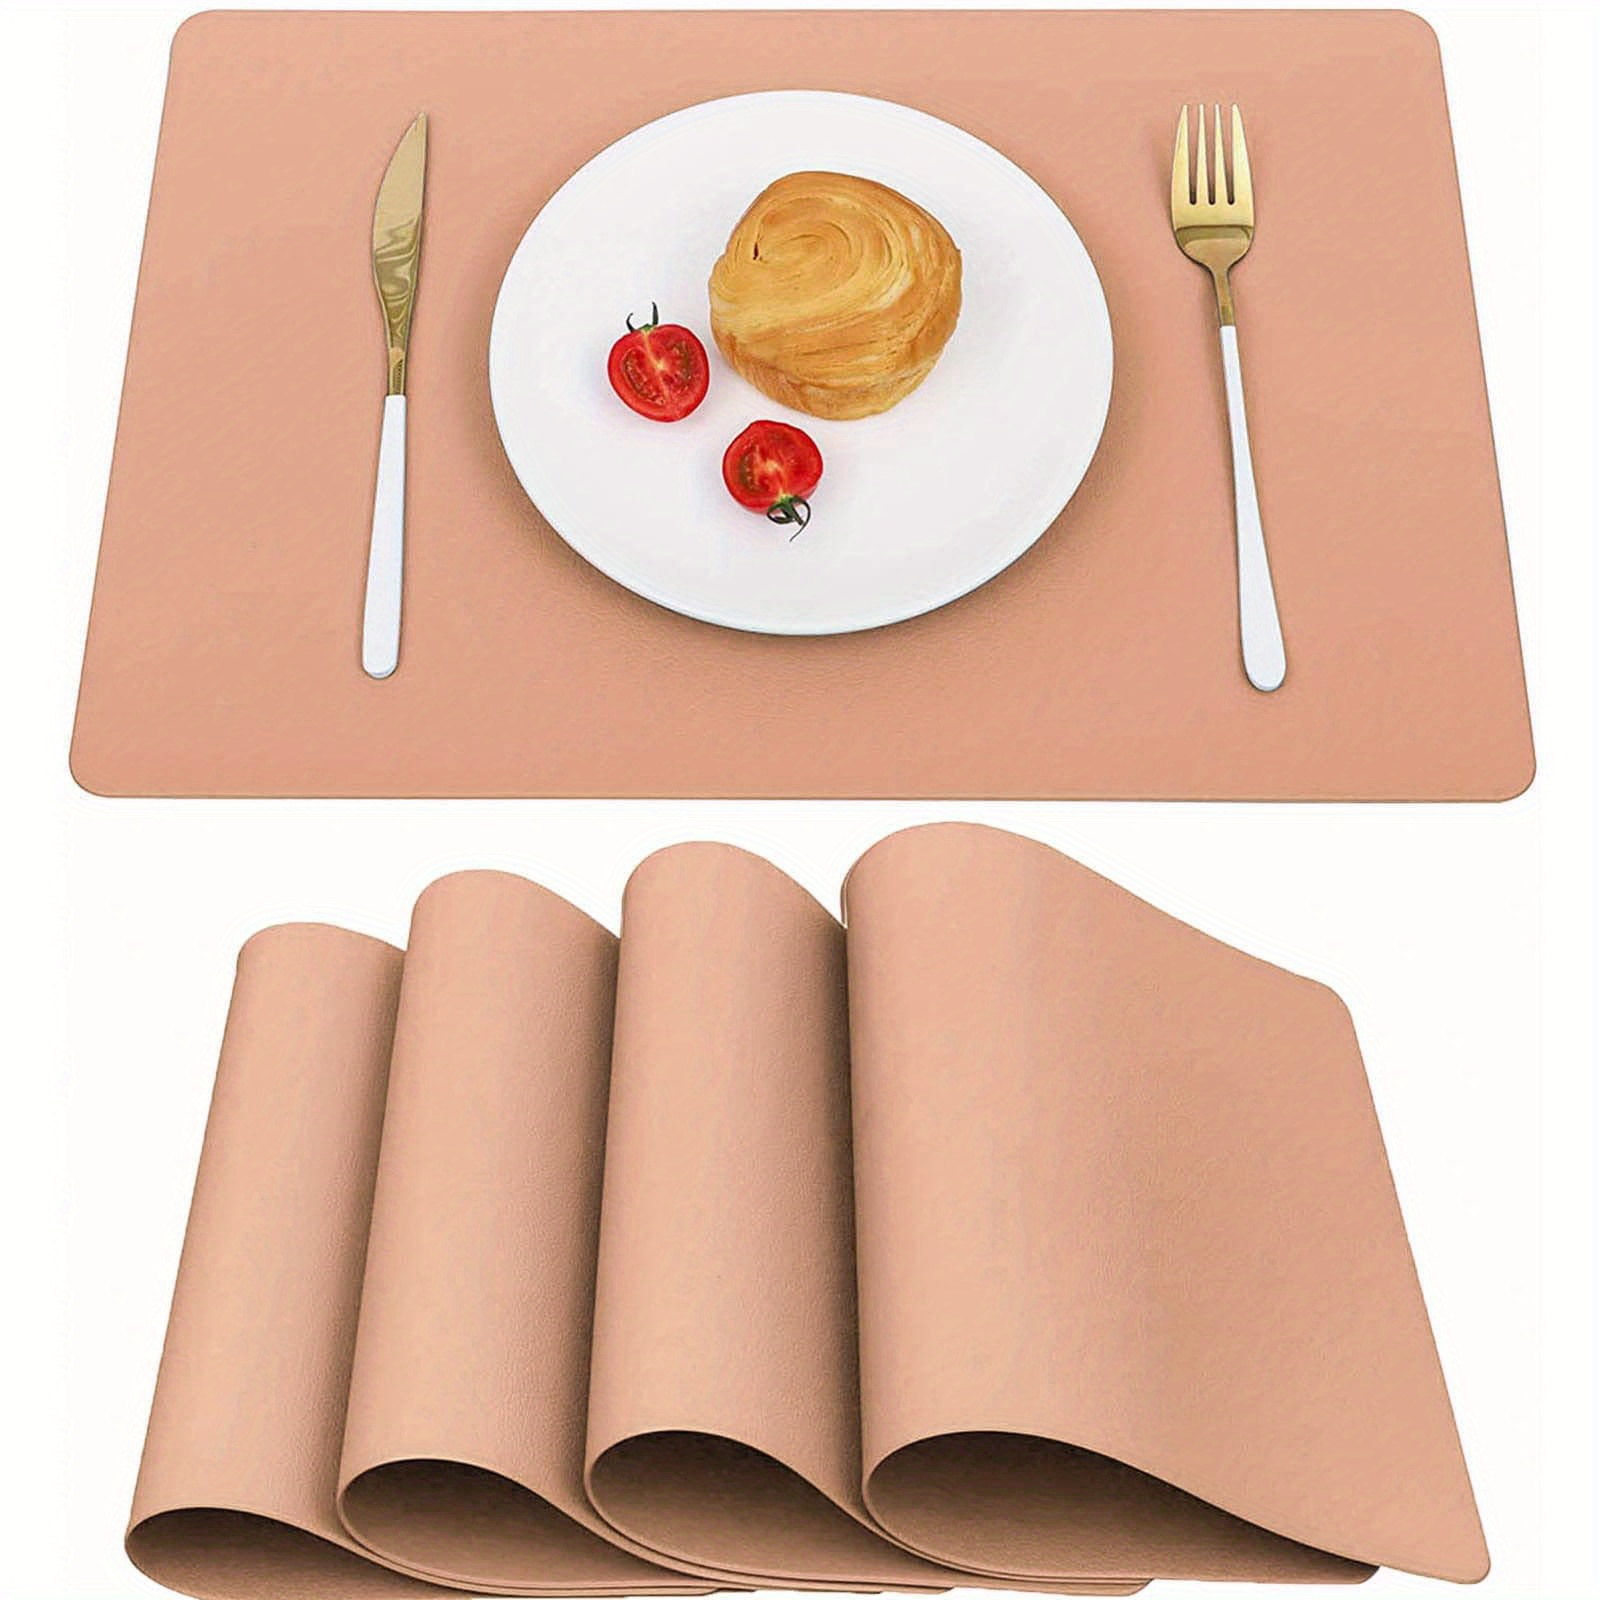 Heat Proof Mat for Table Heat-Resistant Placemats Stain Resistant